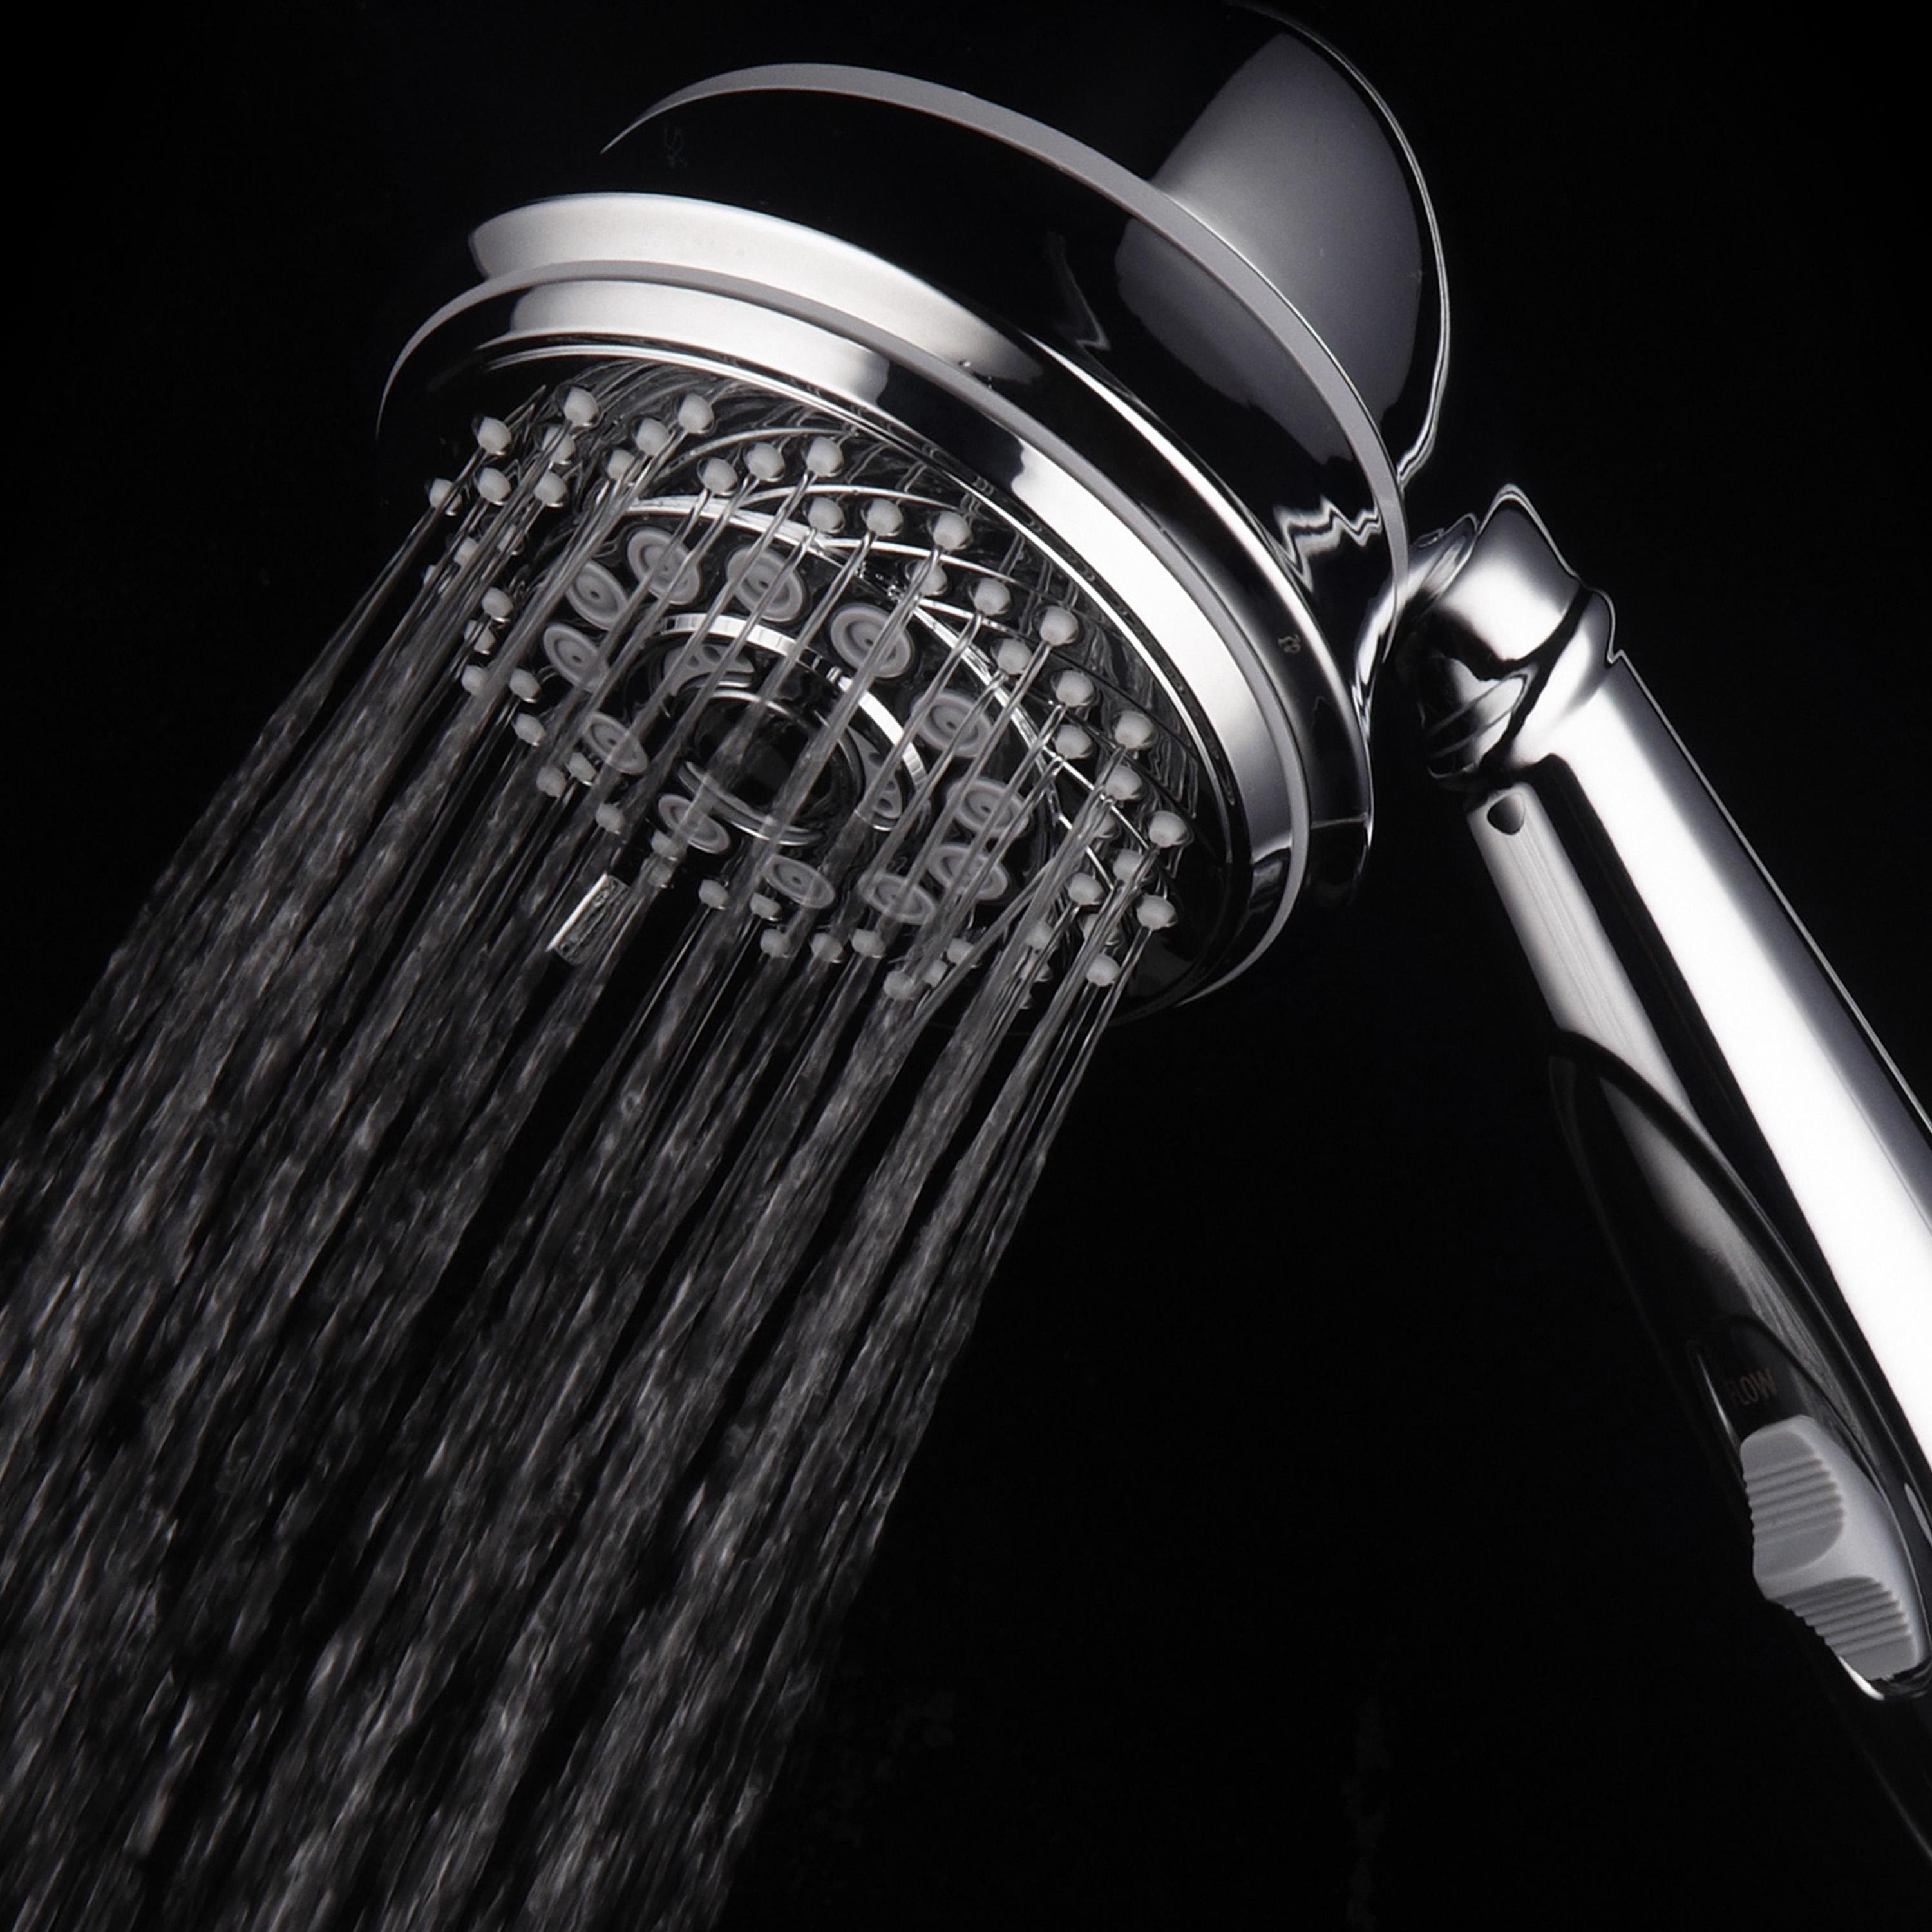 HotelSpa AquaCare 7-Setting, 3-Stage Filtered Handheld Shower Head, Chrome - image 4 of 8